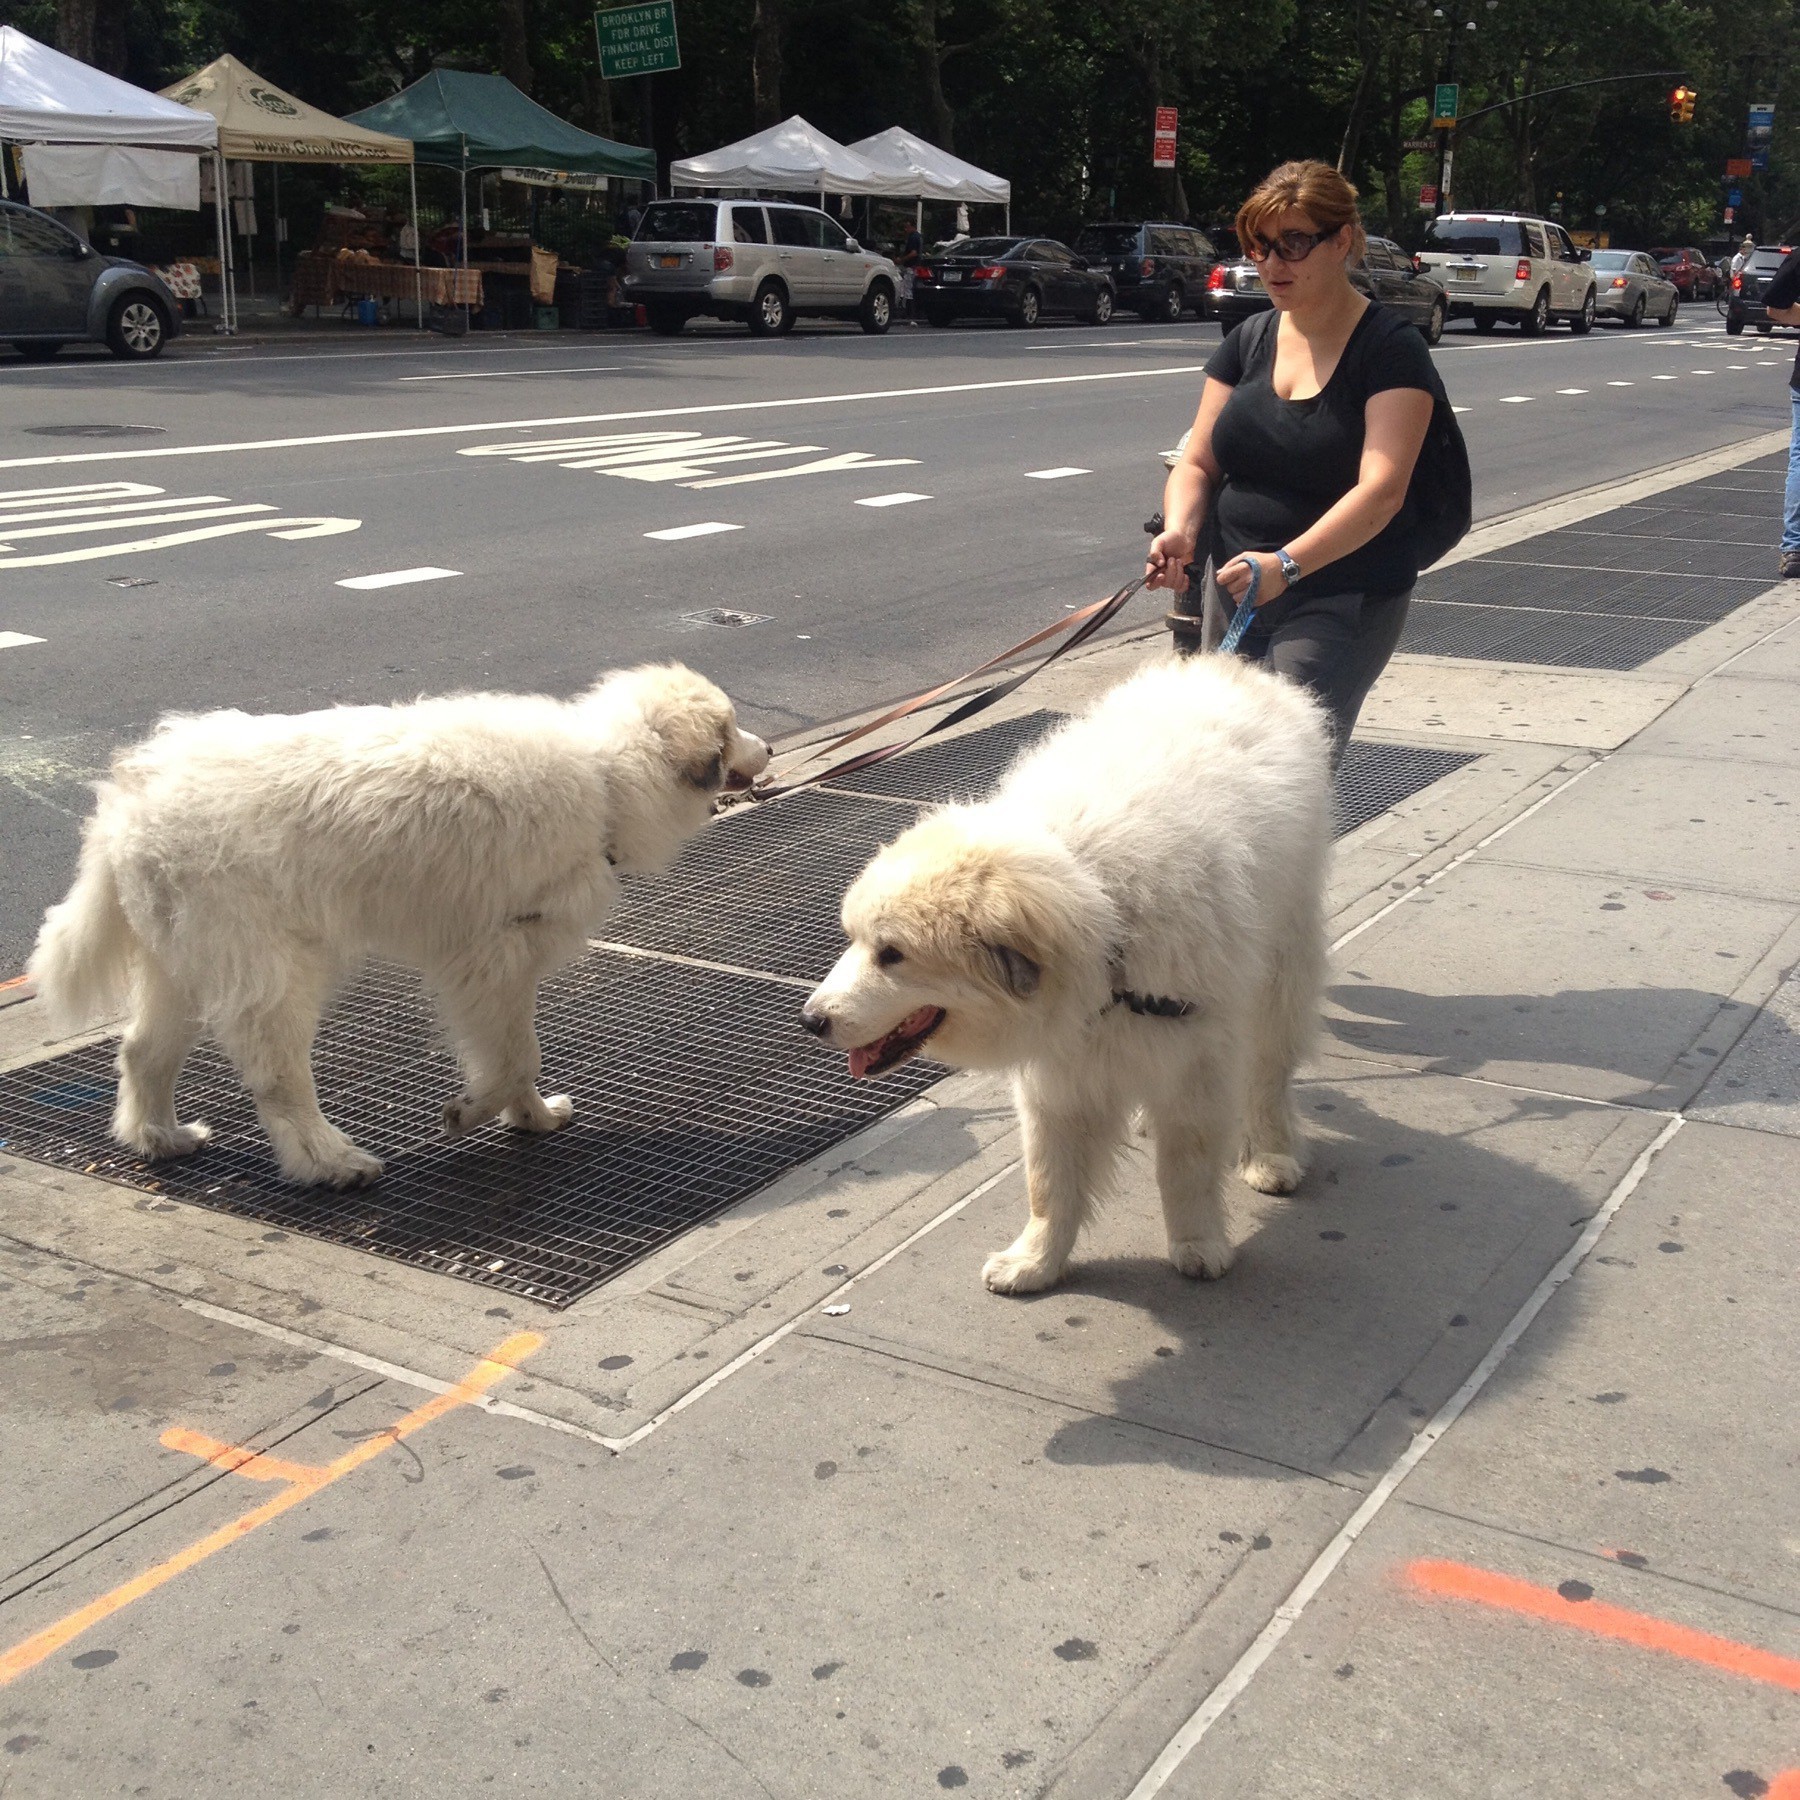 Two extremely large white dogs being walked on a New York City sidewalk.